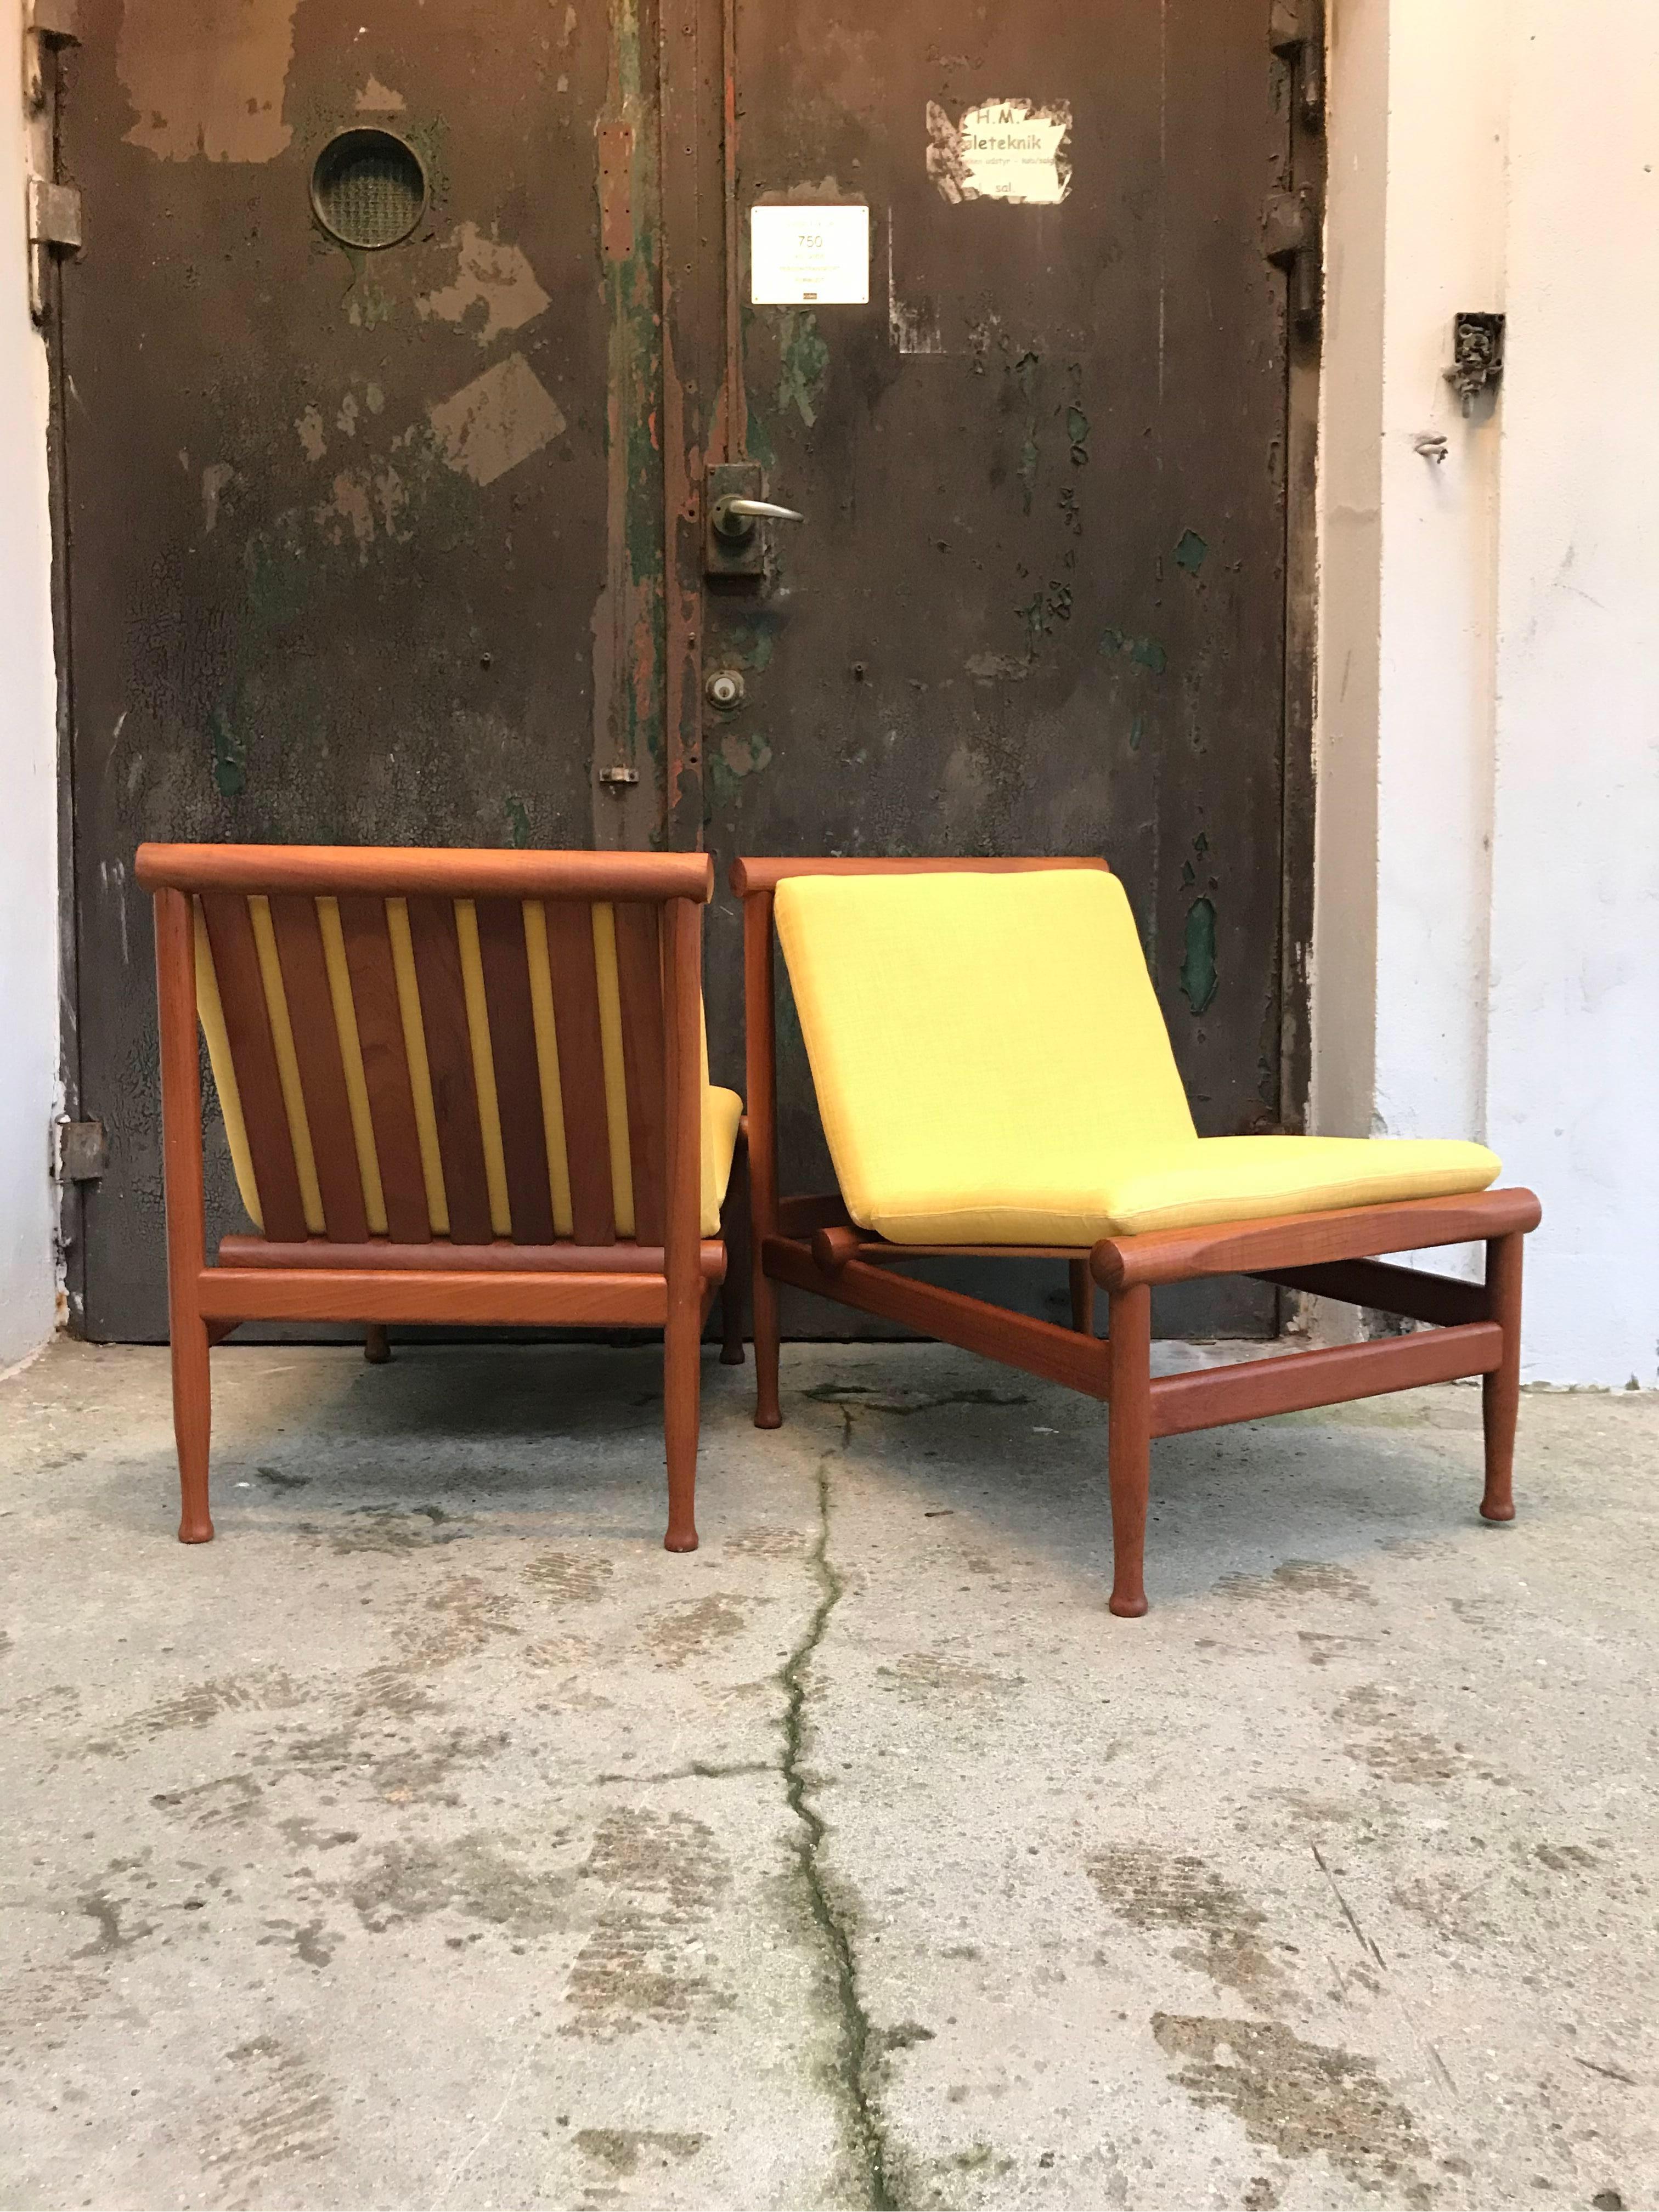 A stunning and rare vintage pair of Kai Lyngfeldt Larsen easy chairs model 501 also known as the Japan chair and made by Søborg Møbler in Søborg, Denmark (my town). These chairs originally from a government building are in fantastic original